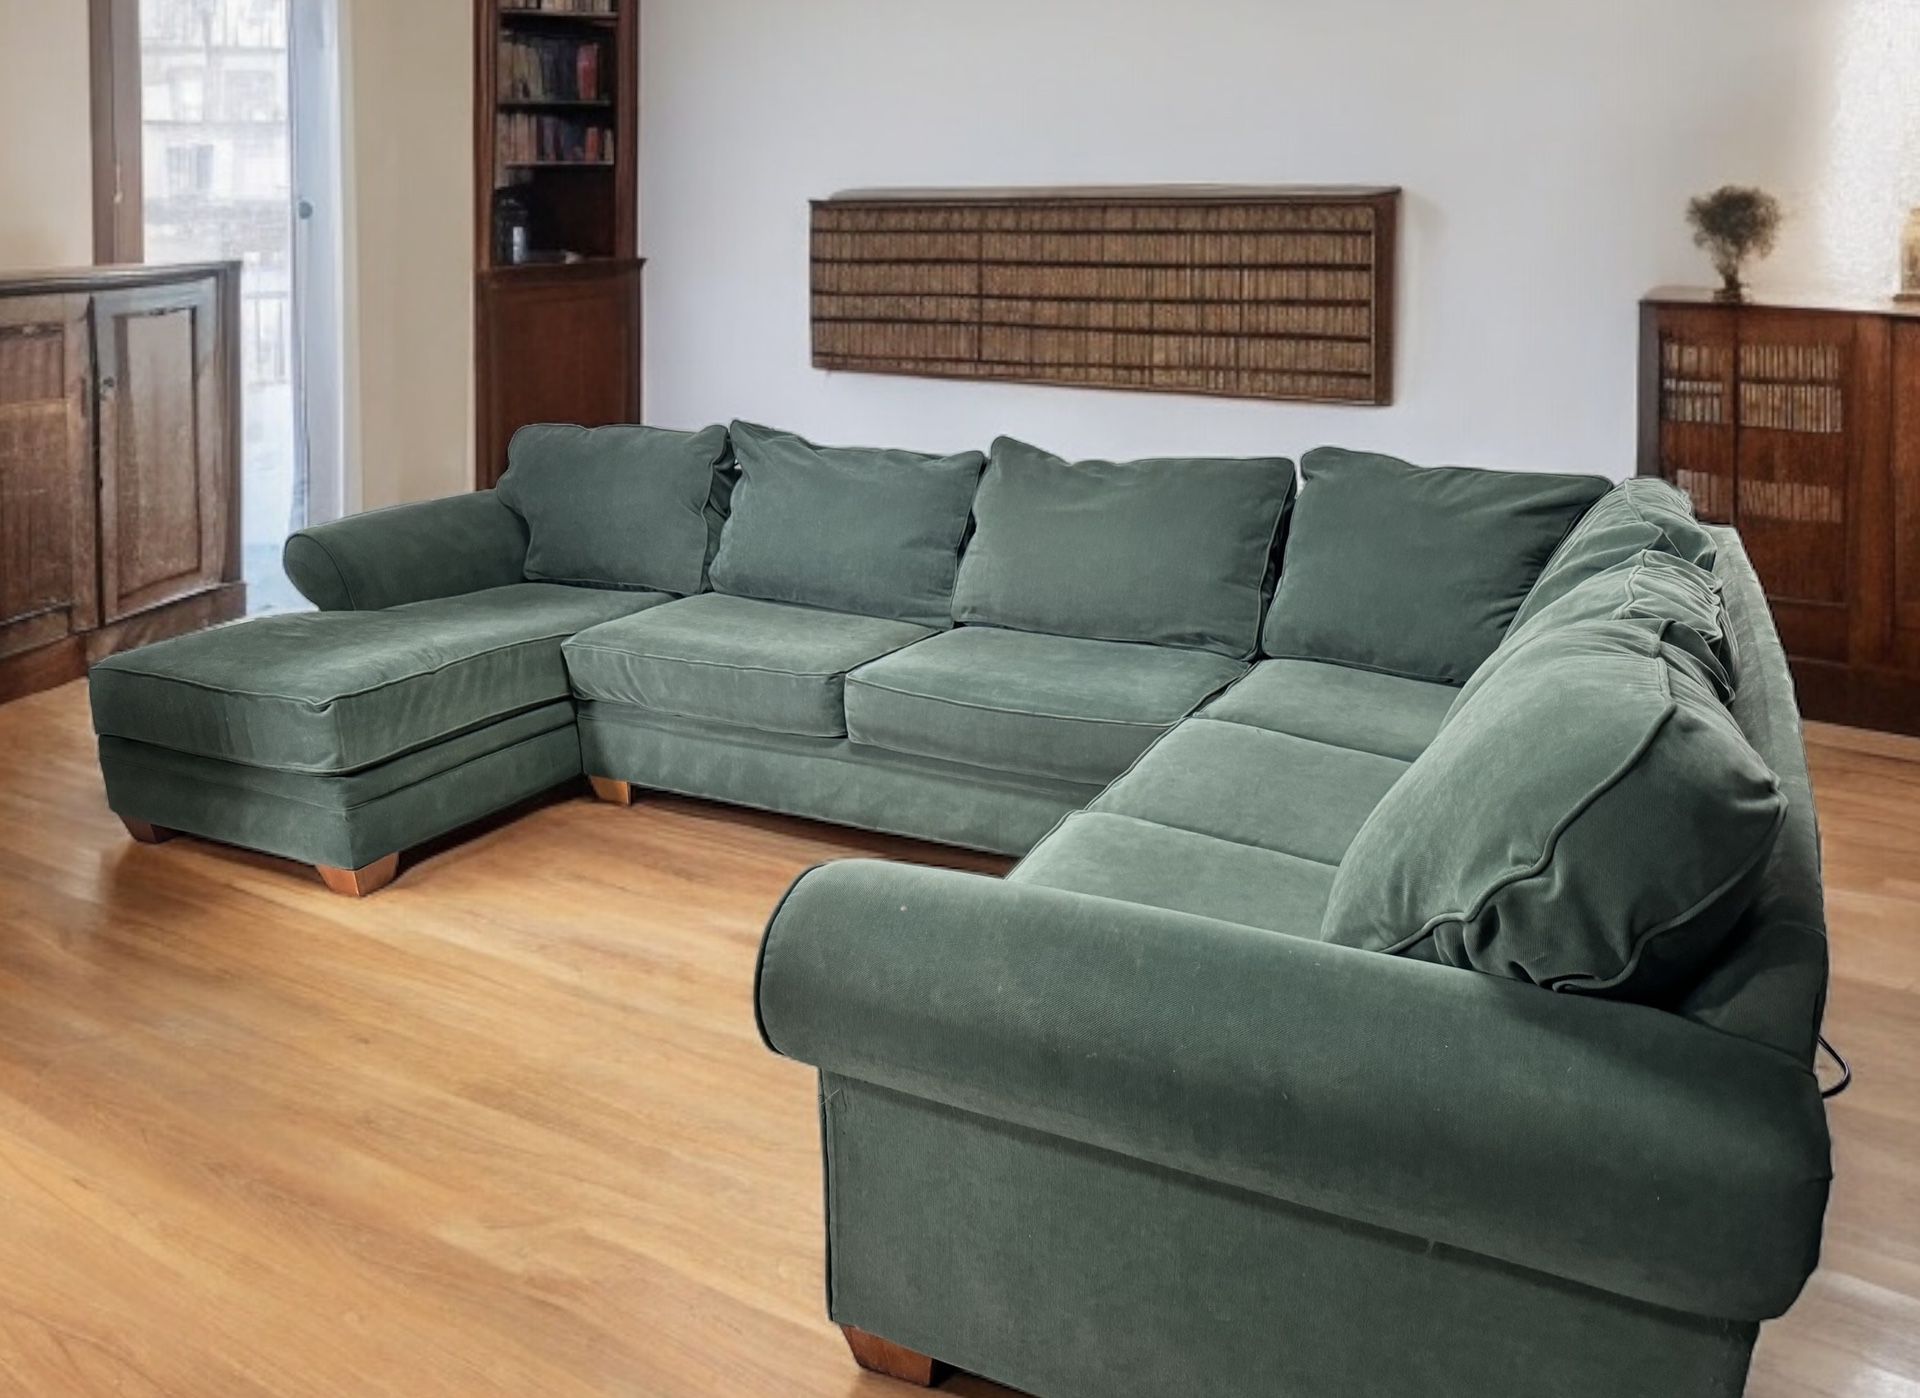 Big Green Sectional Sofa Couch with Chaise